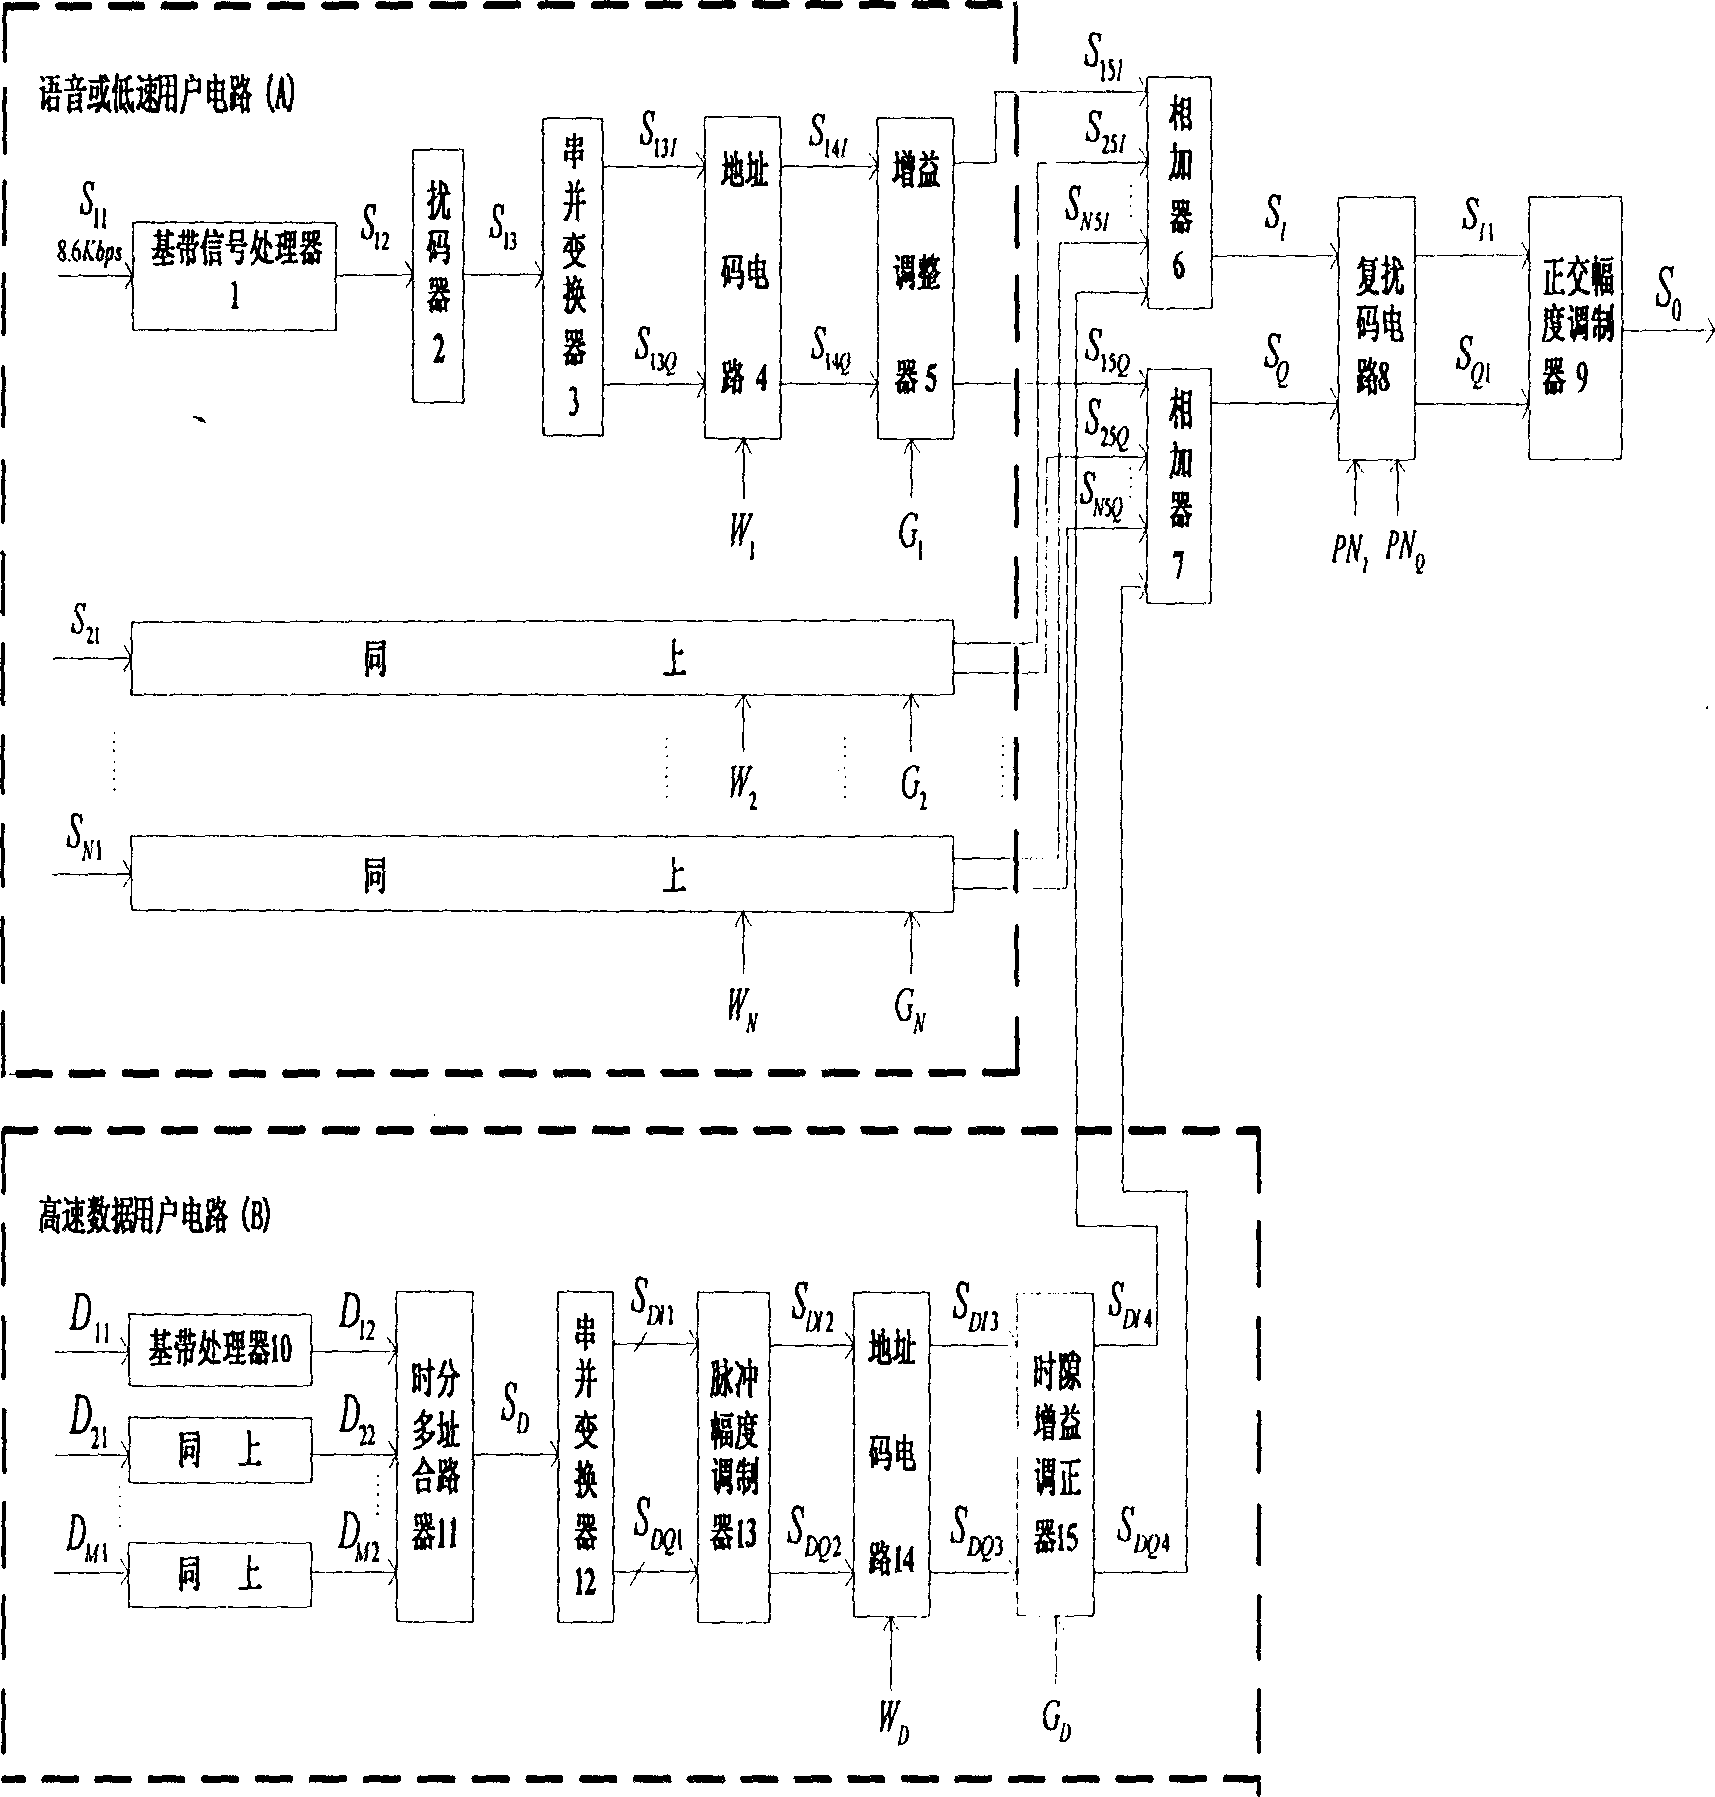 Method of implementing CDMA/TDMA mobile communication by means of interference eliminator